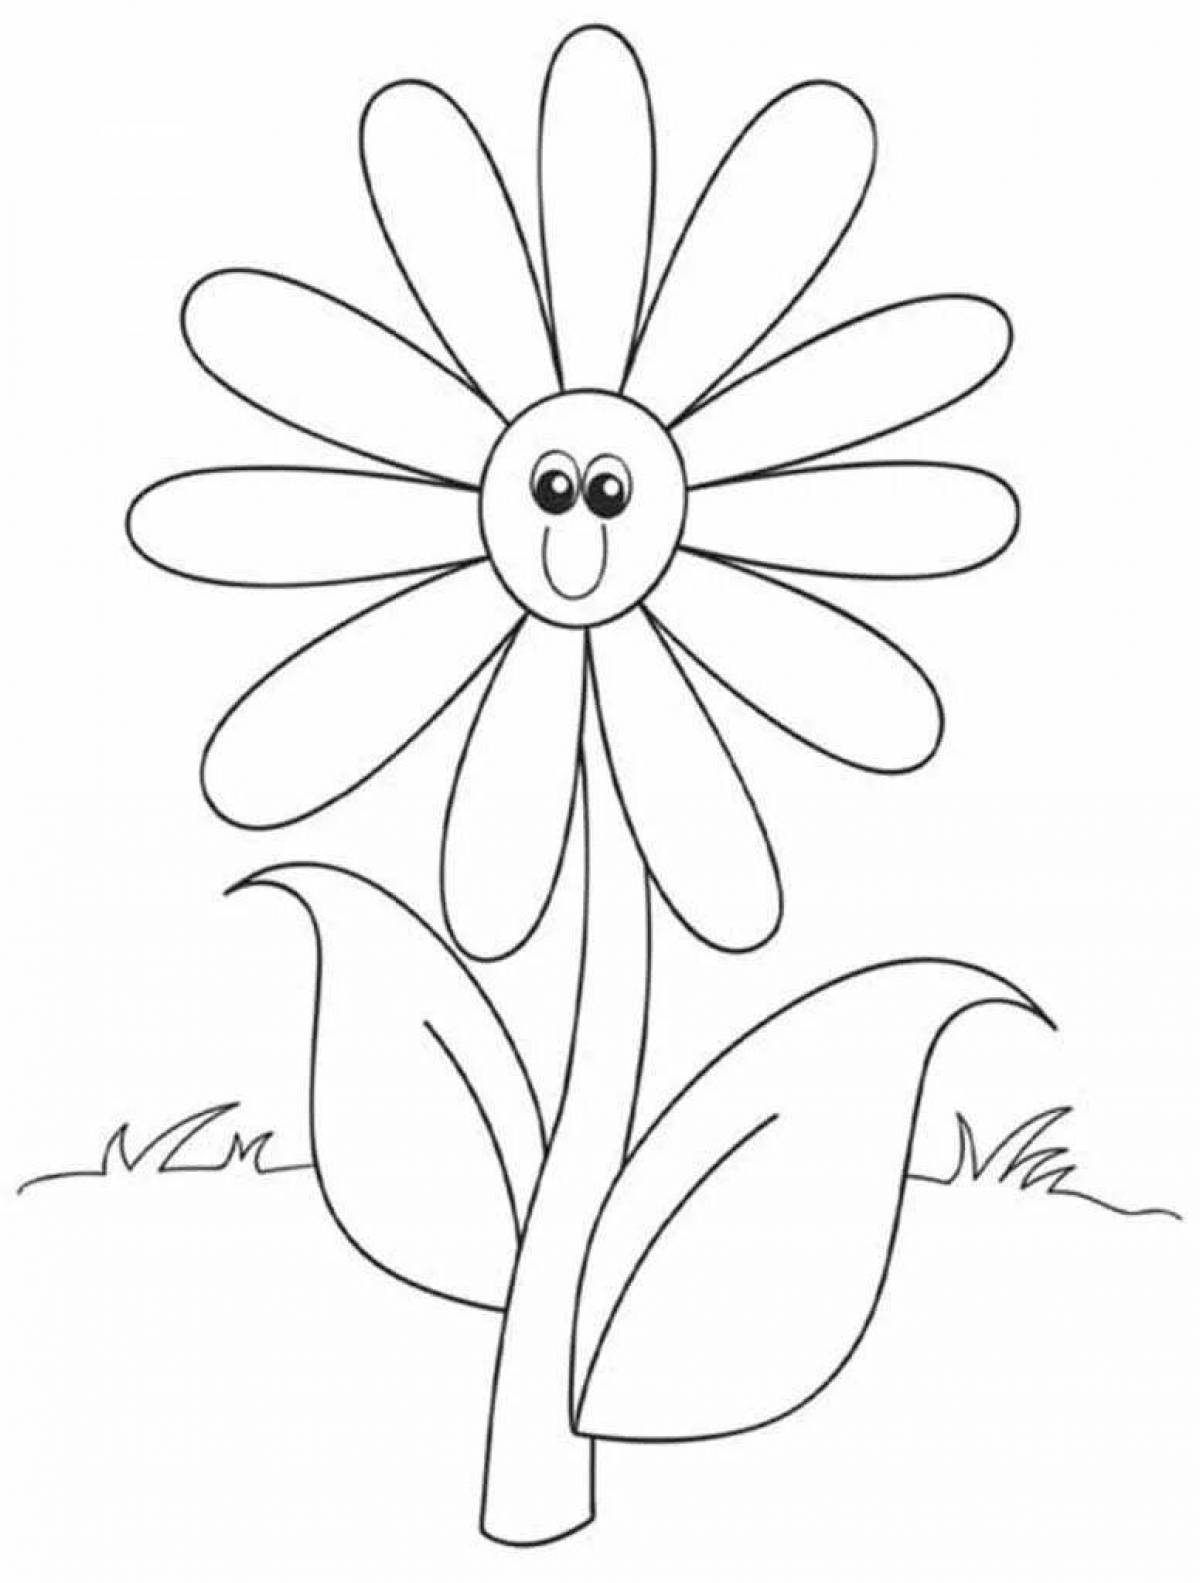 Elegant flower coloring page with seven colors template